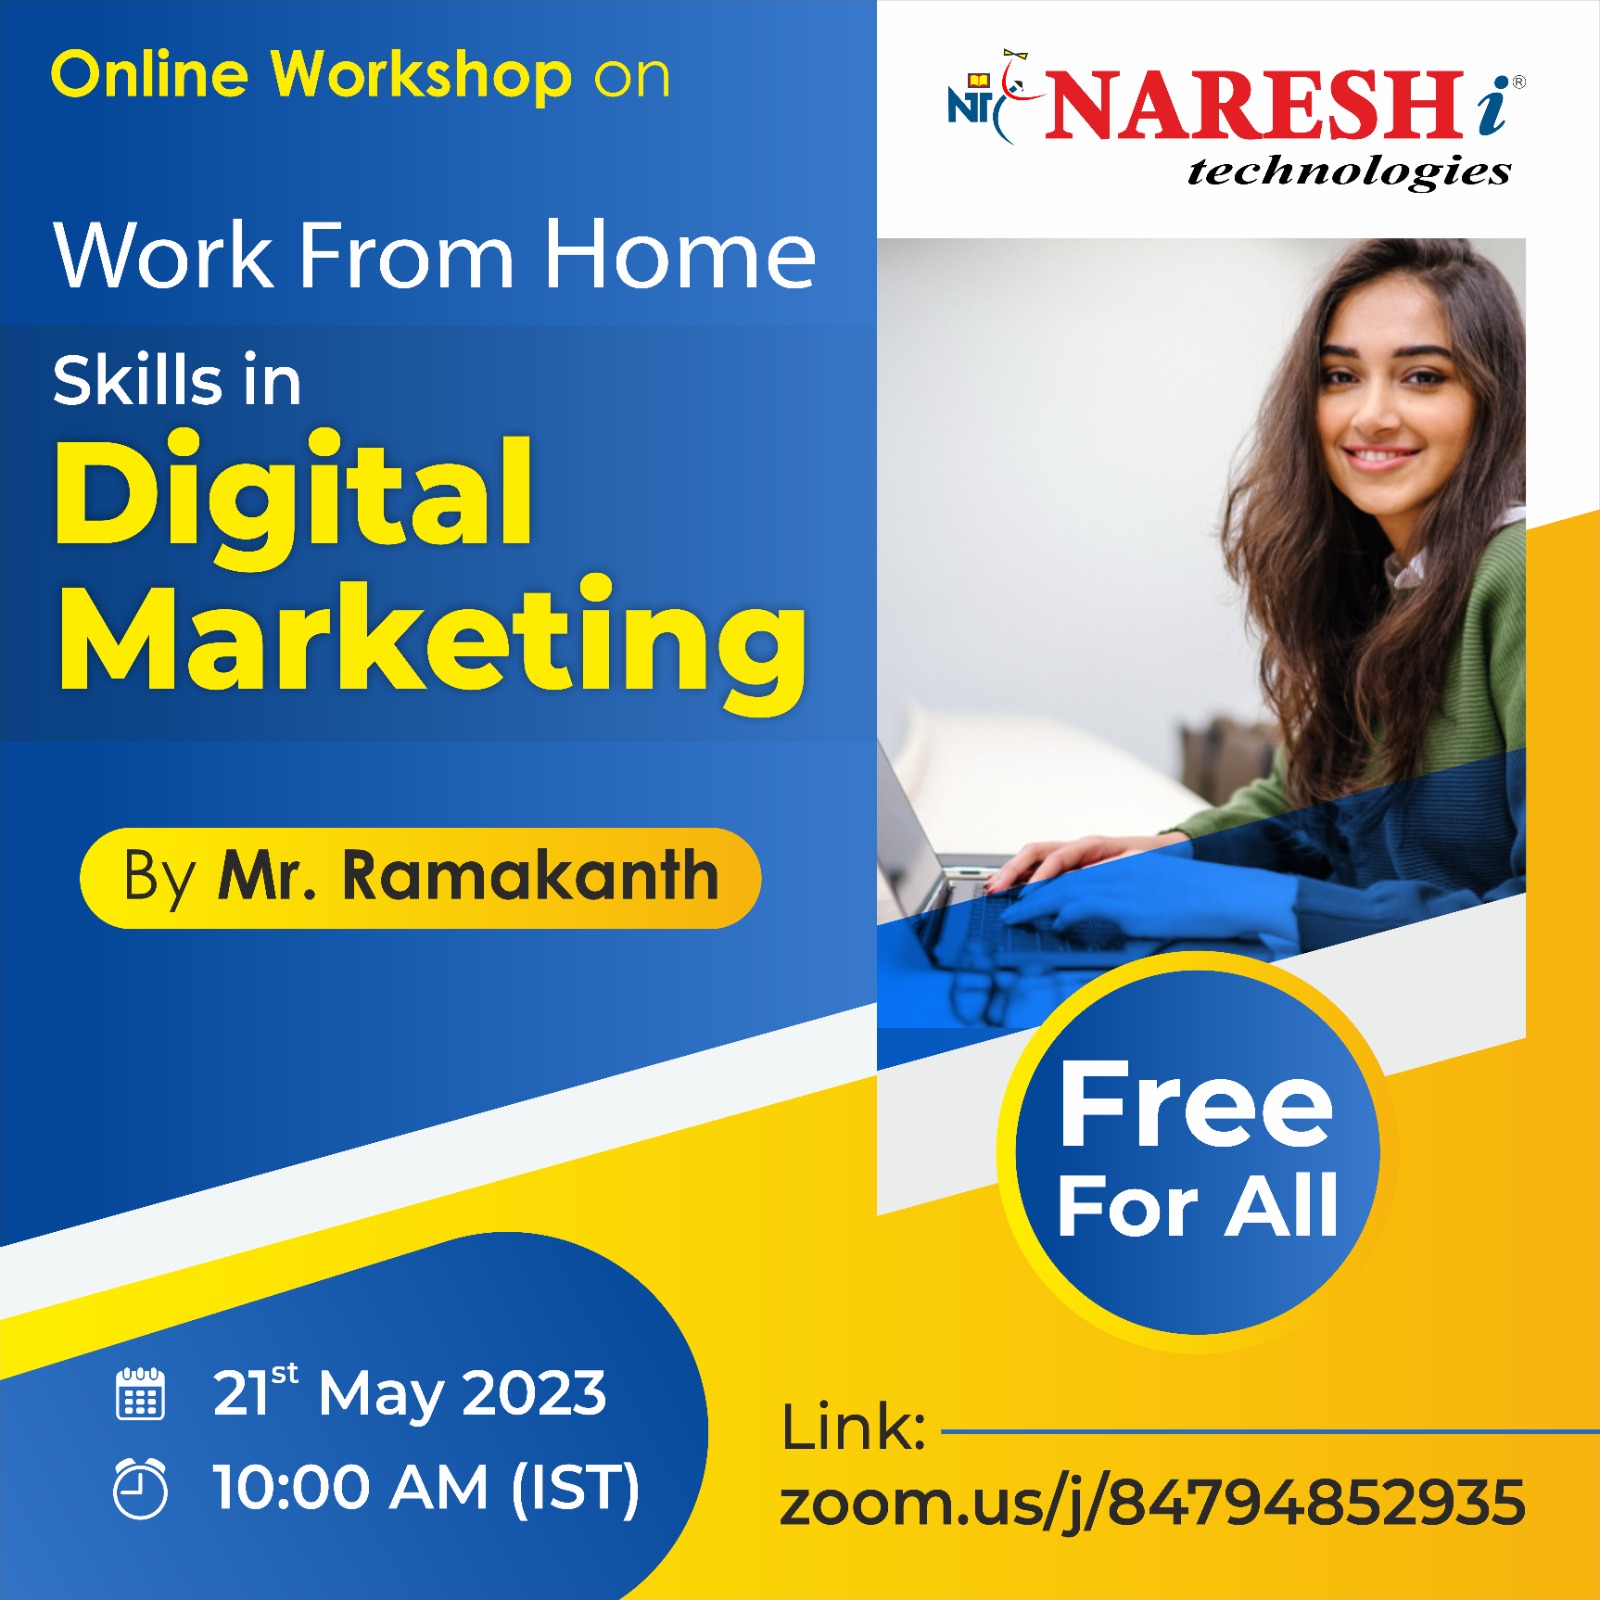 Free Workshop On Work From Home Skills in Digital Marketing - NareshIT, Online Event